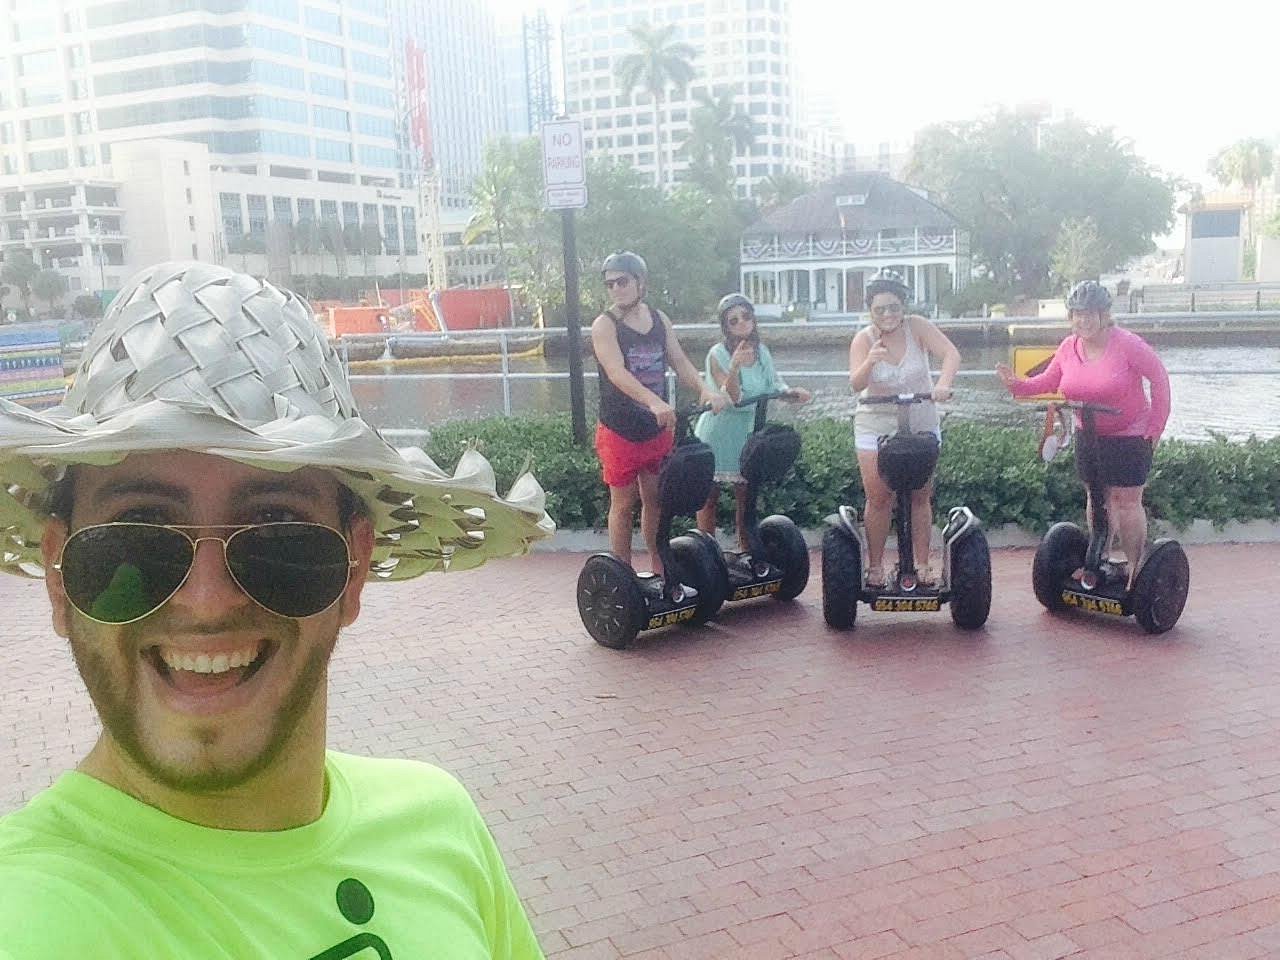 Segway Fort Lauderdale All You Need To Know Before You Go 